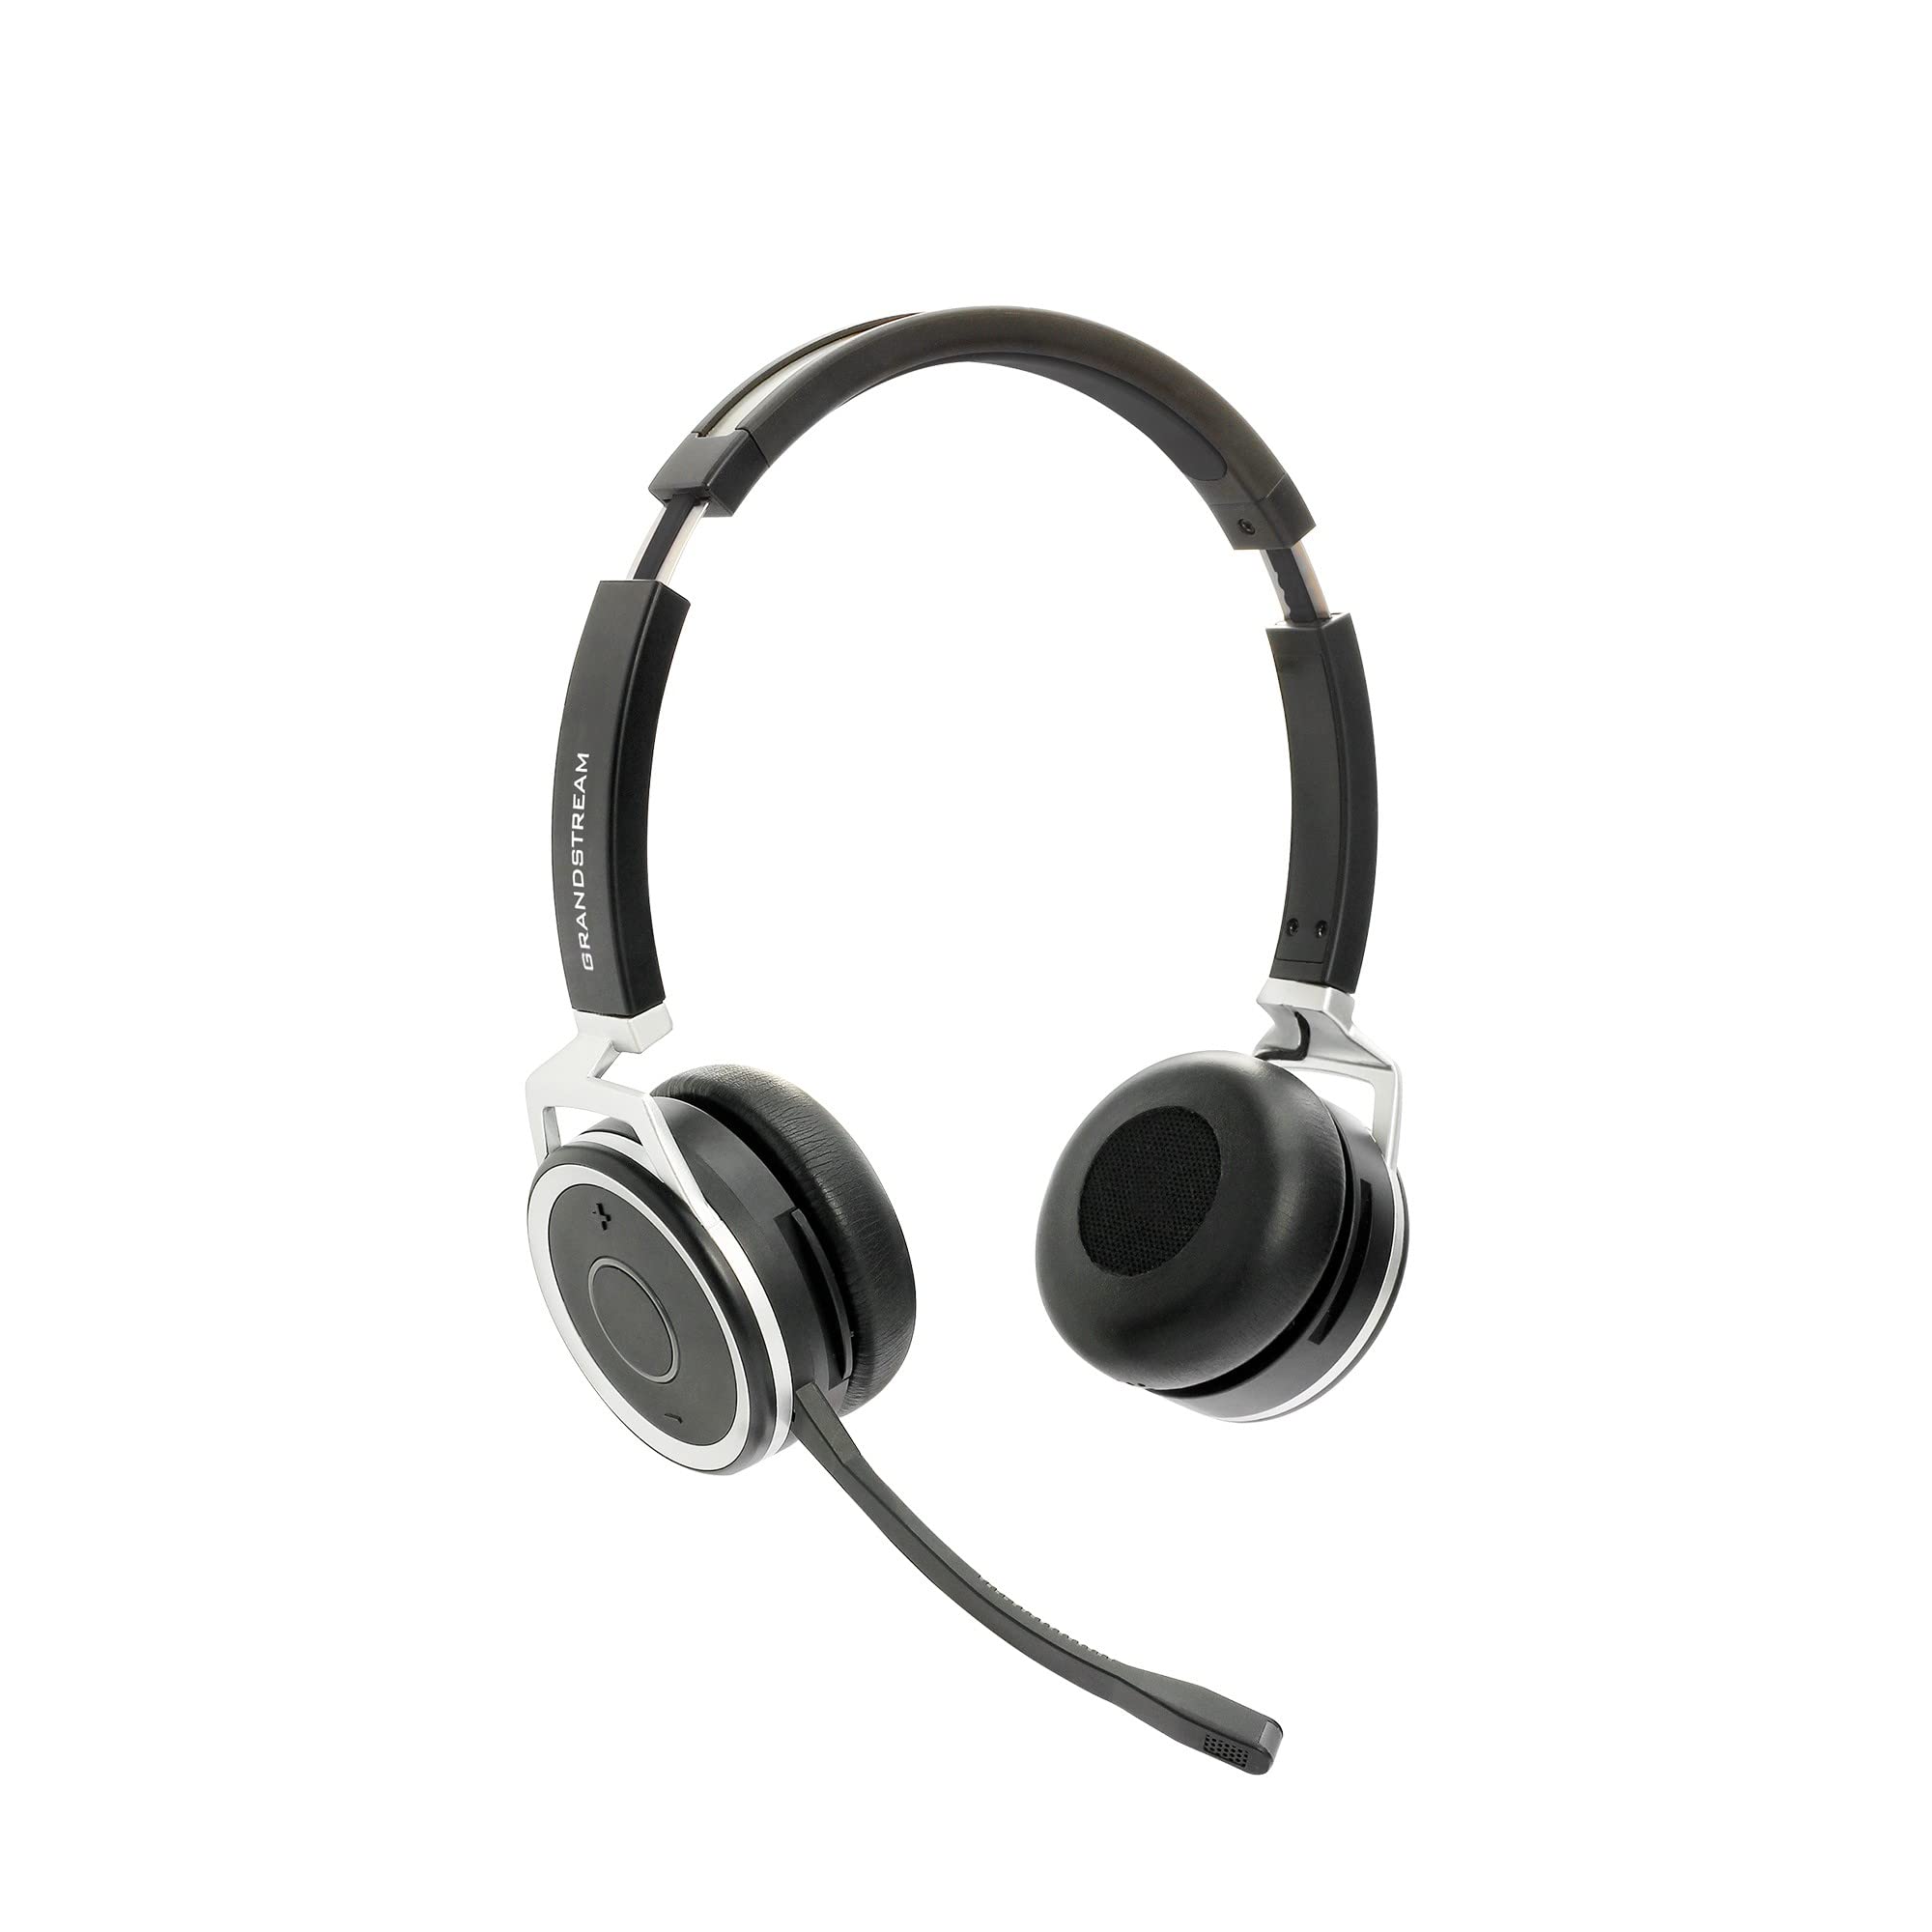 Grandstream-GUV3050-BT-Headset-With-Busy-Light view a